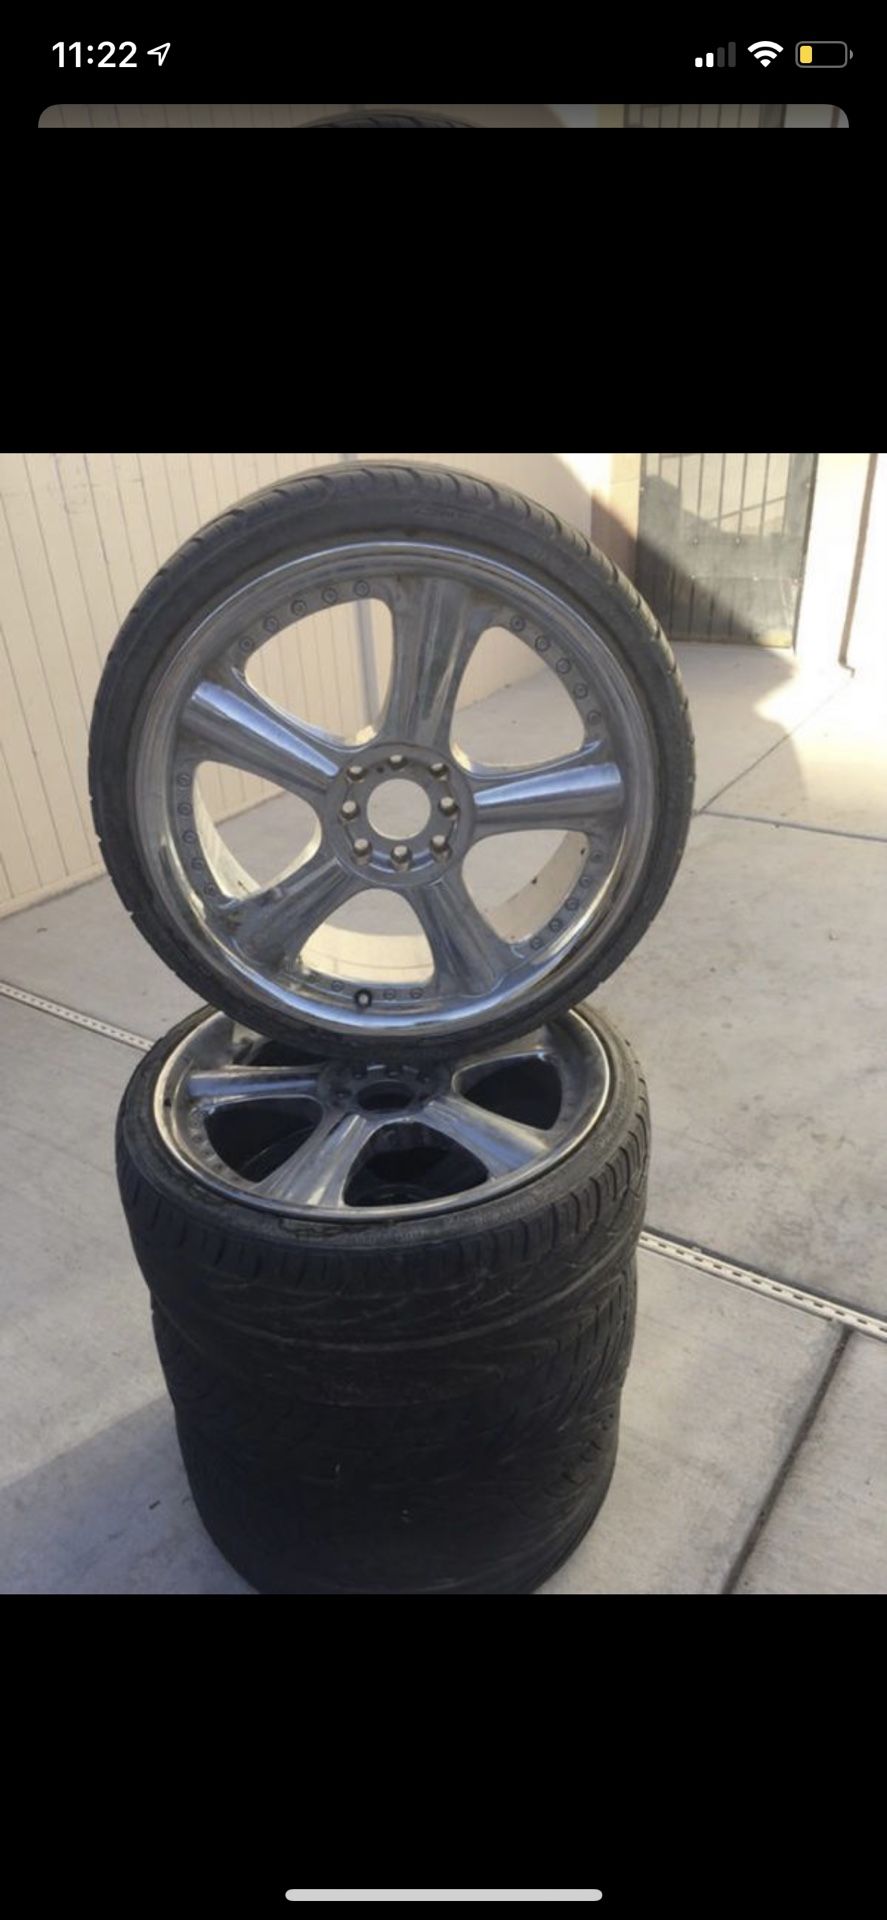 18 'Rims They were used on a Honda but are universal